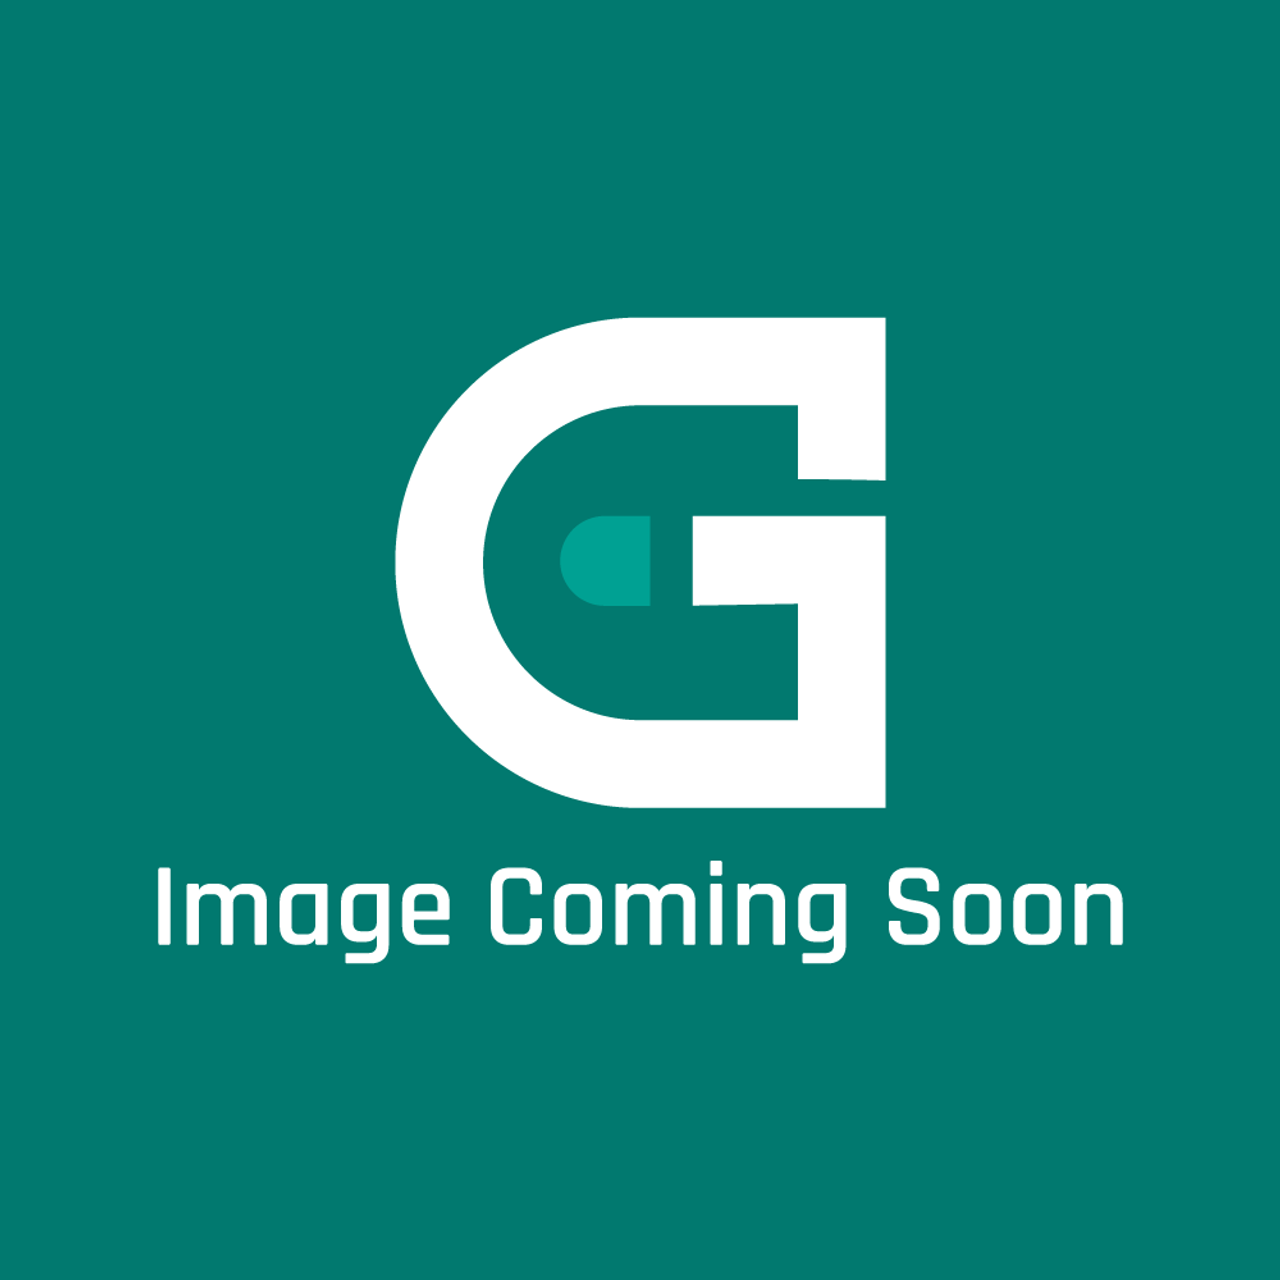 GE Appliances WB28K10665 - Tube Cooktop Supply Asm - Image Coming Soon!